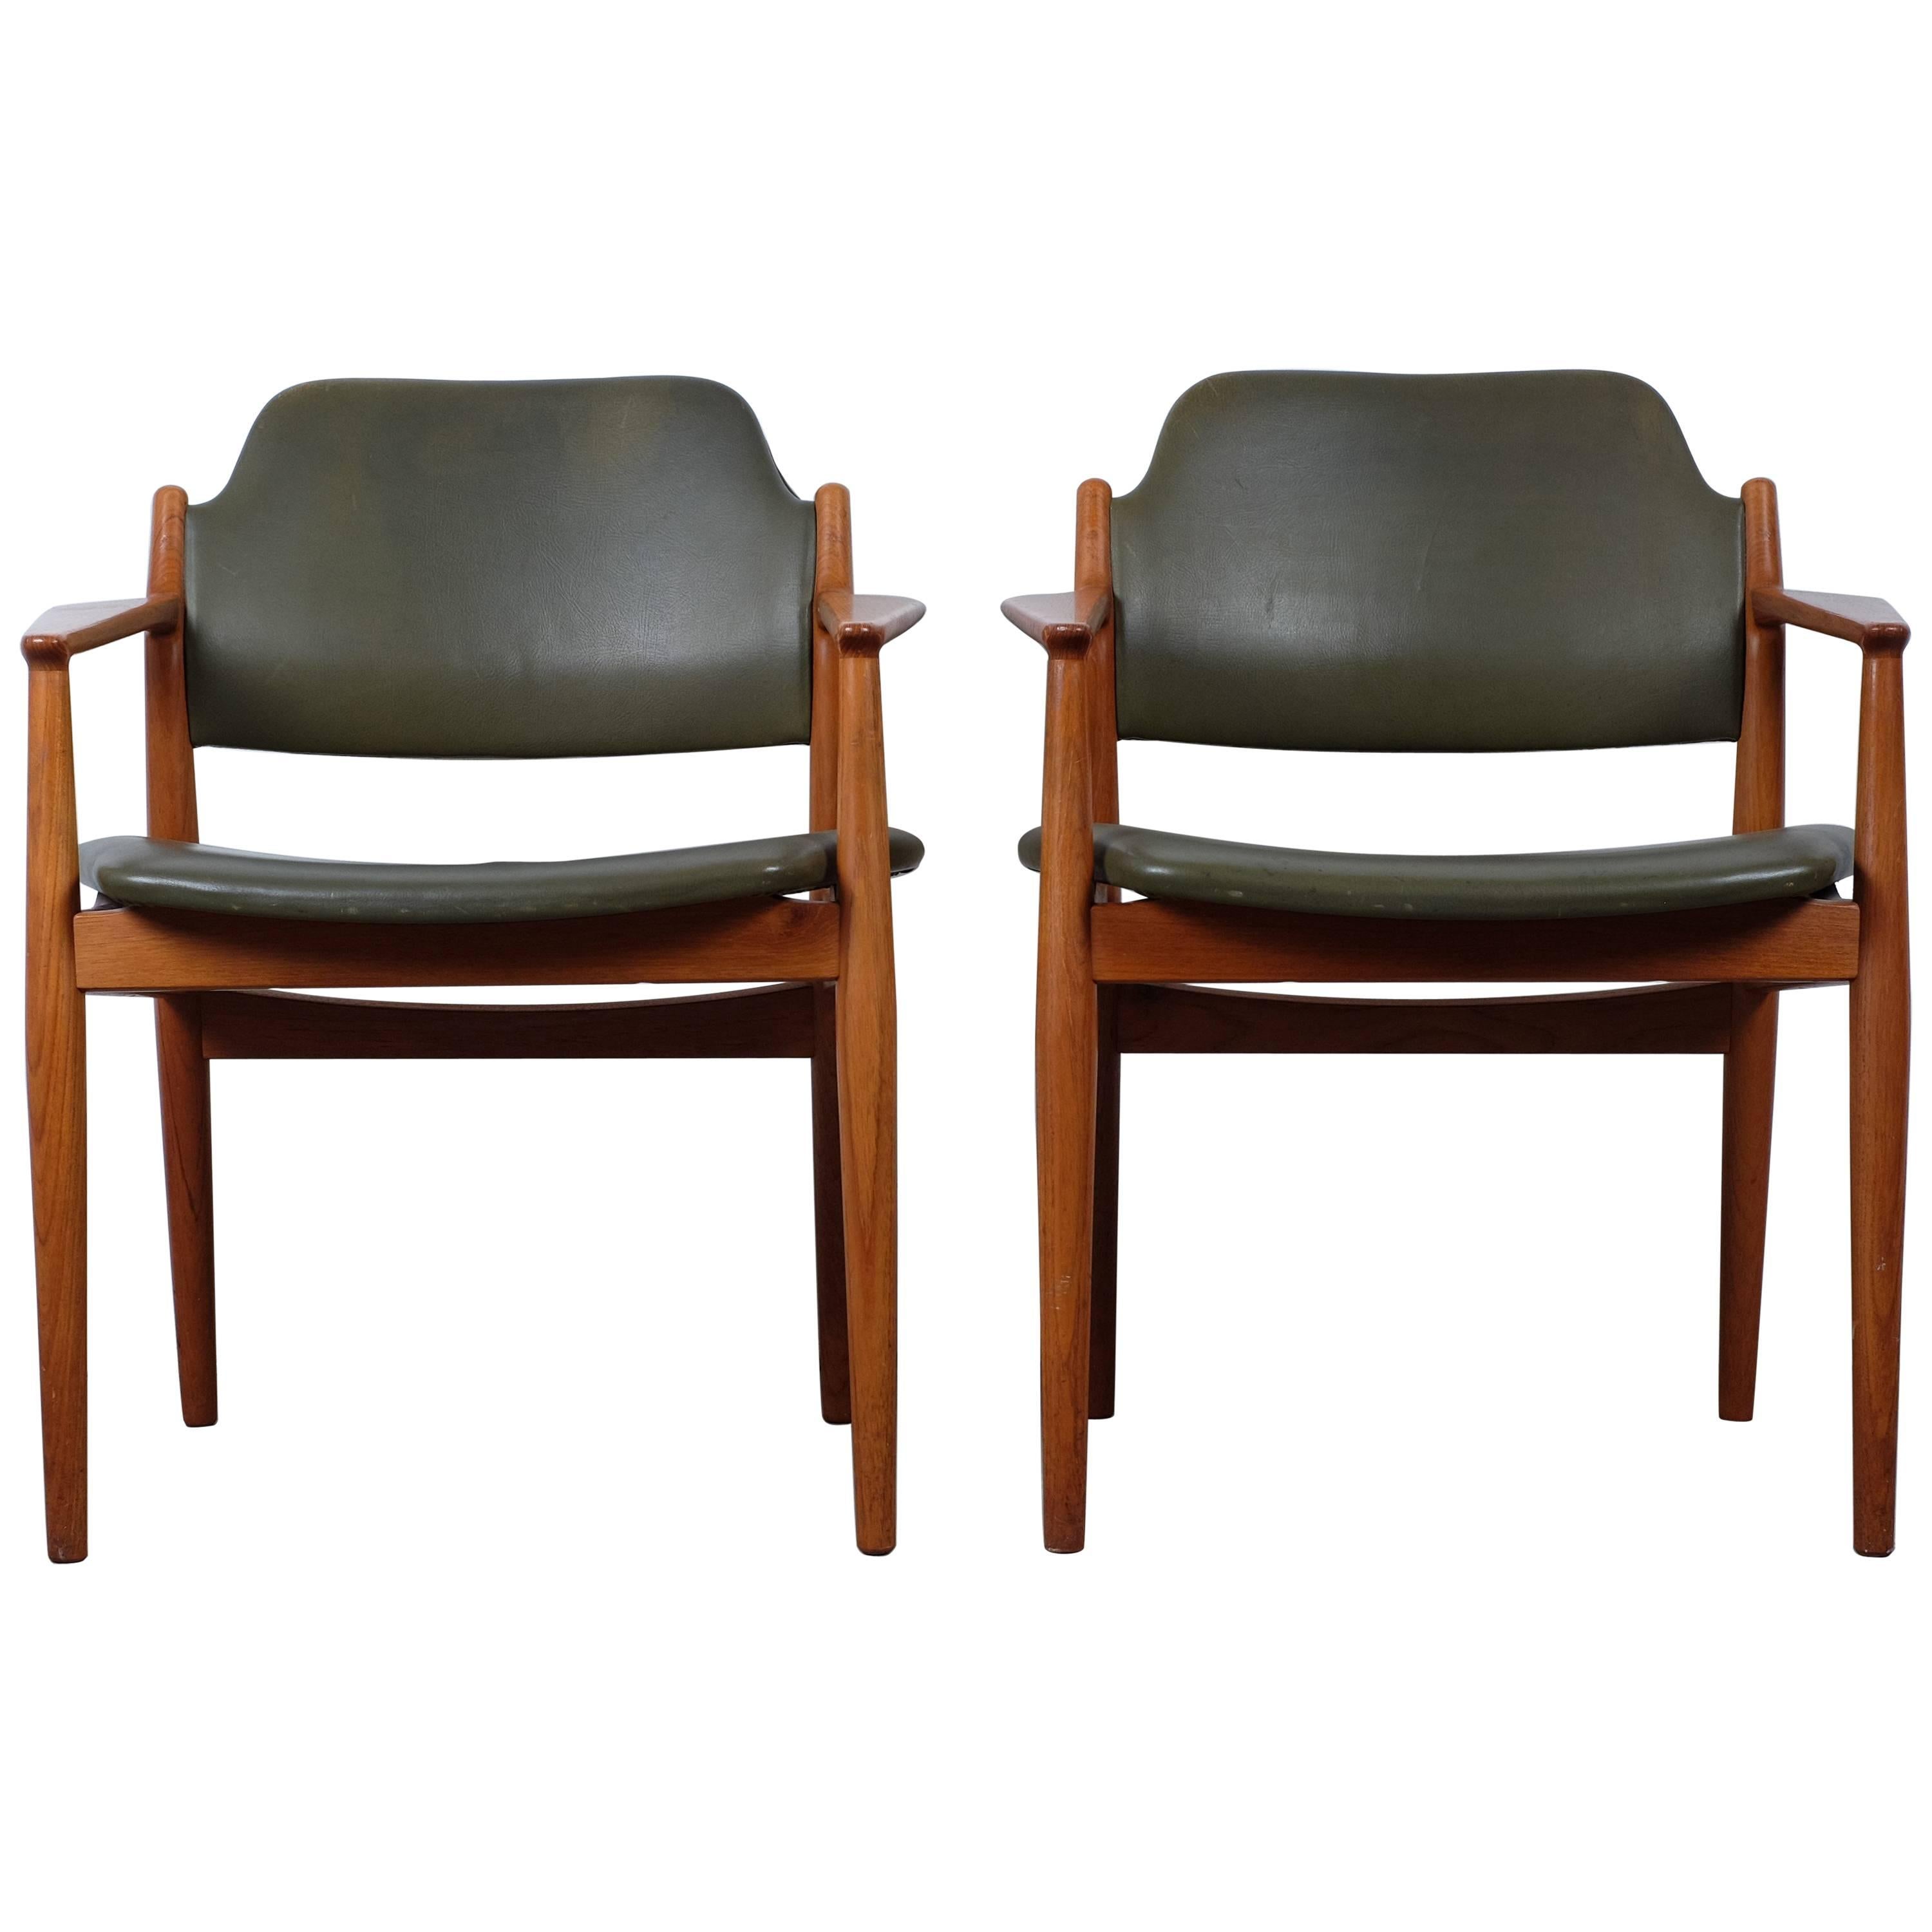 Set of Two Arne Vodder Armchairs in Teak, Model '62A' from Sibast